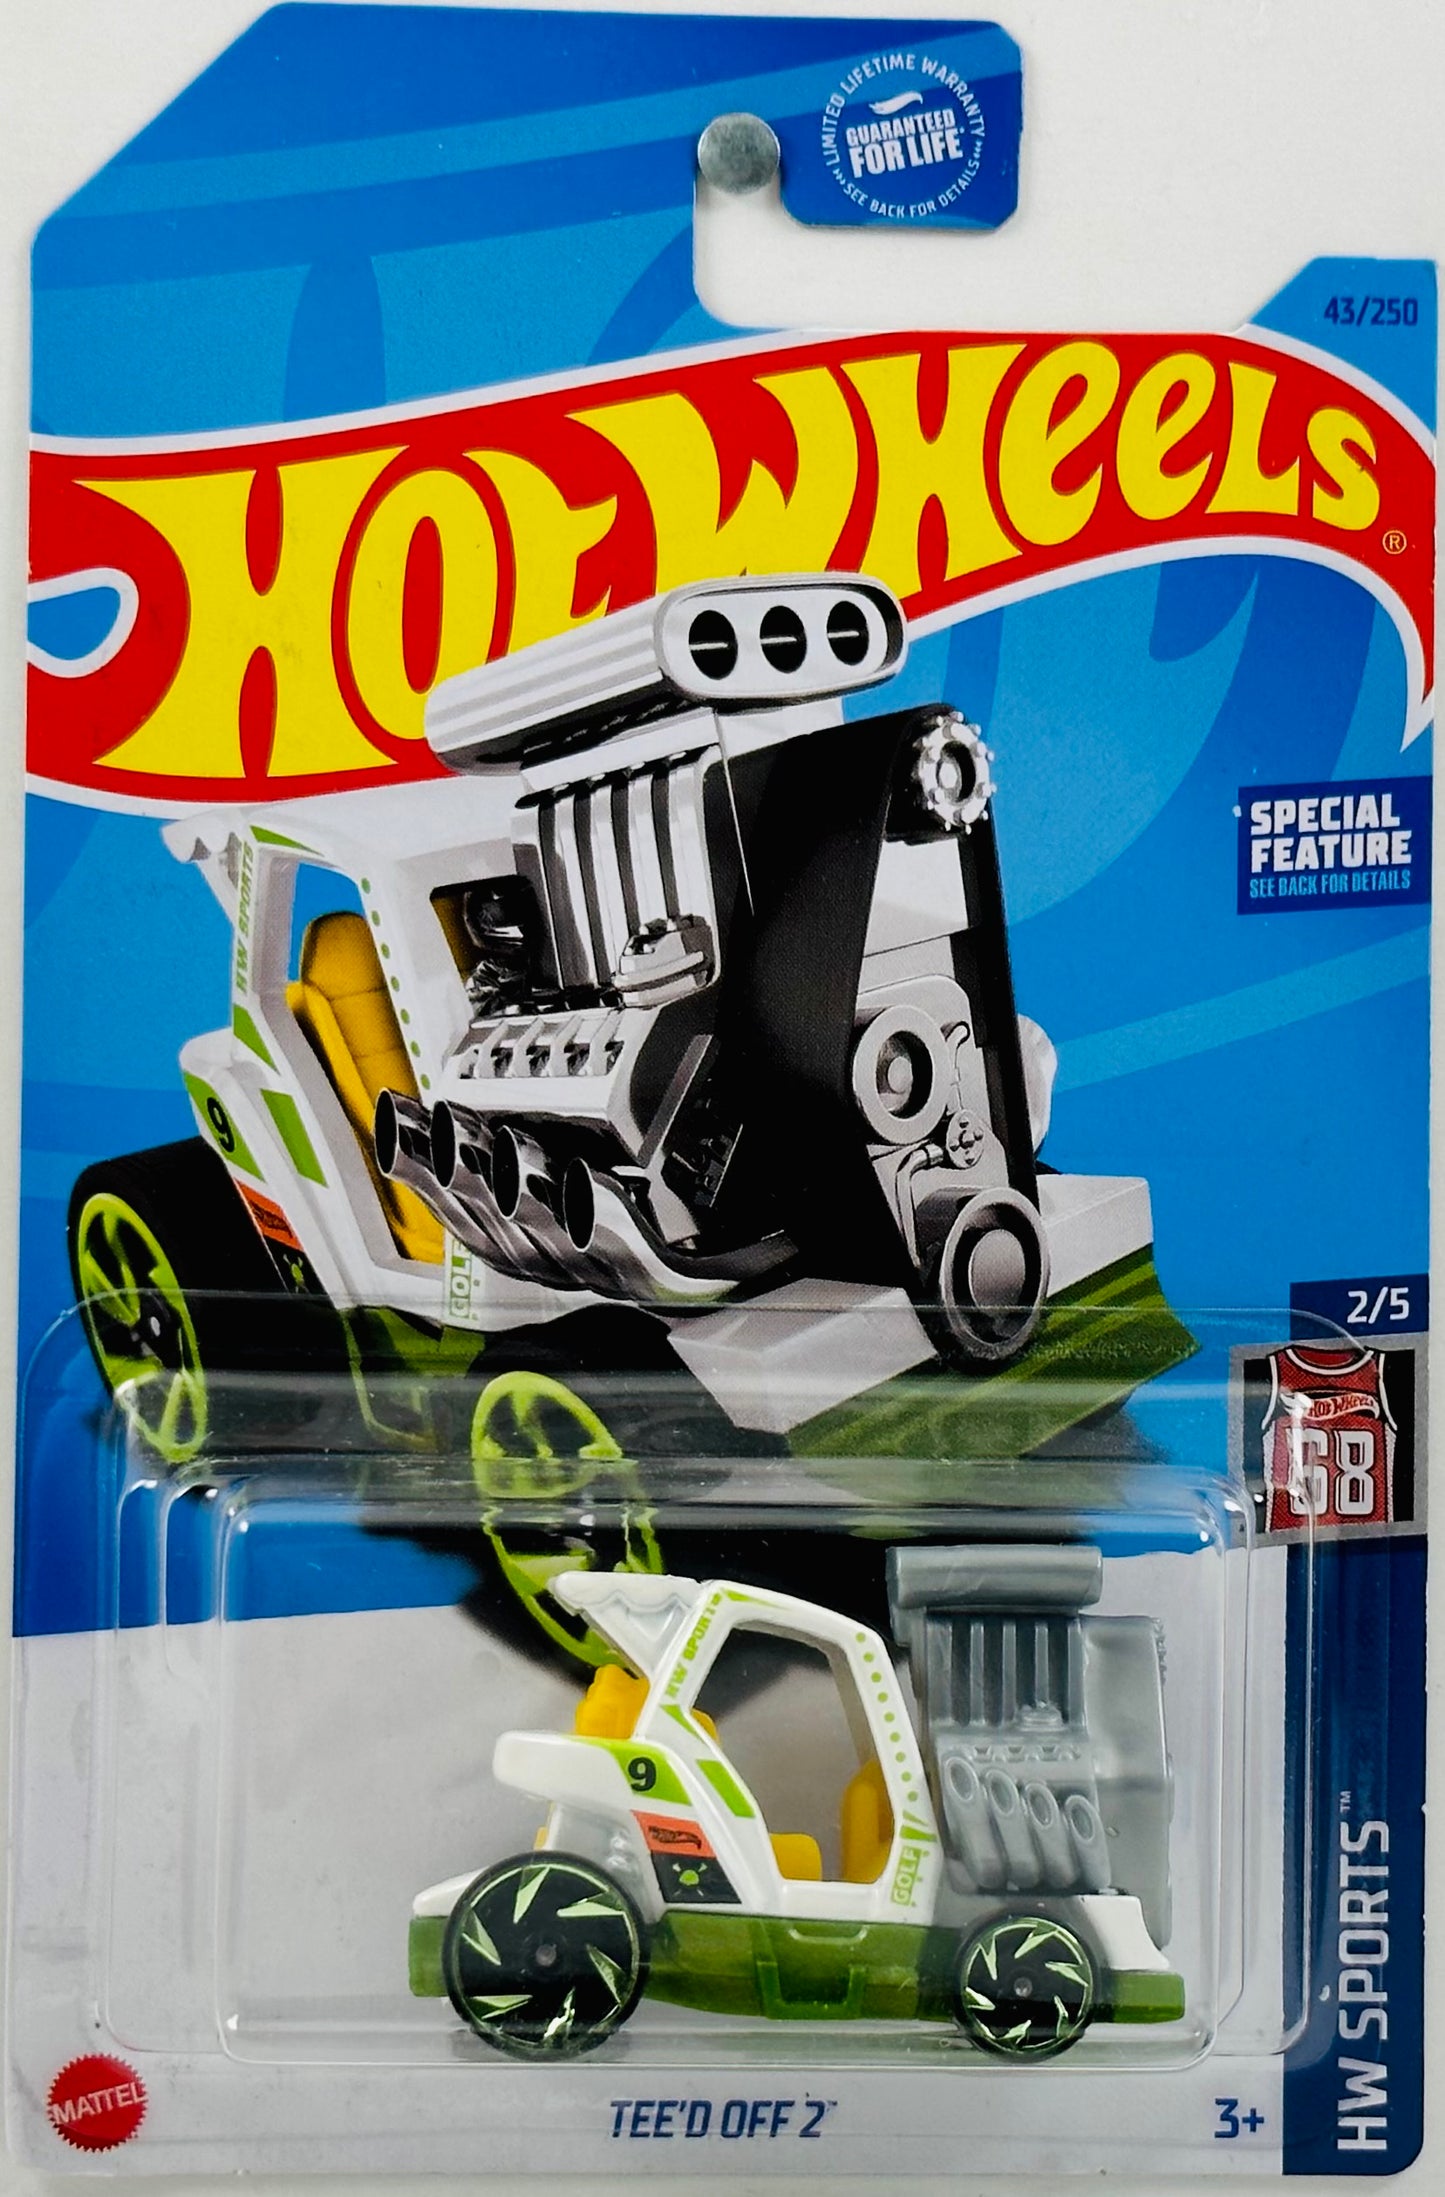 Hot Wheels 2023 - Collector # 043/250 - HW Sports 02/05 - Tee'd Off 2 - White - 'Golf' / '9' / Green Base - Special Feature - USA